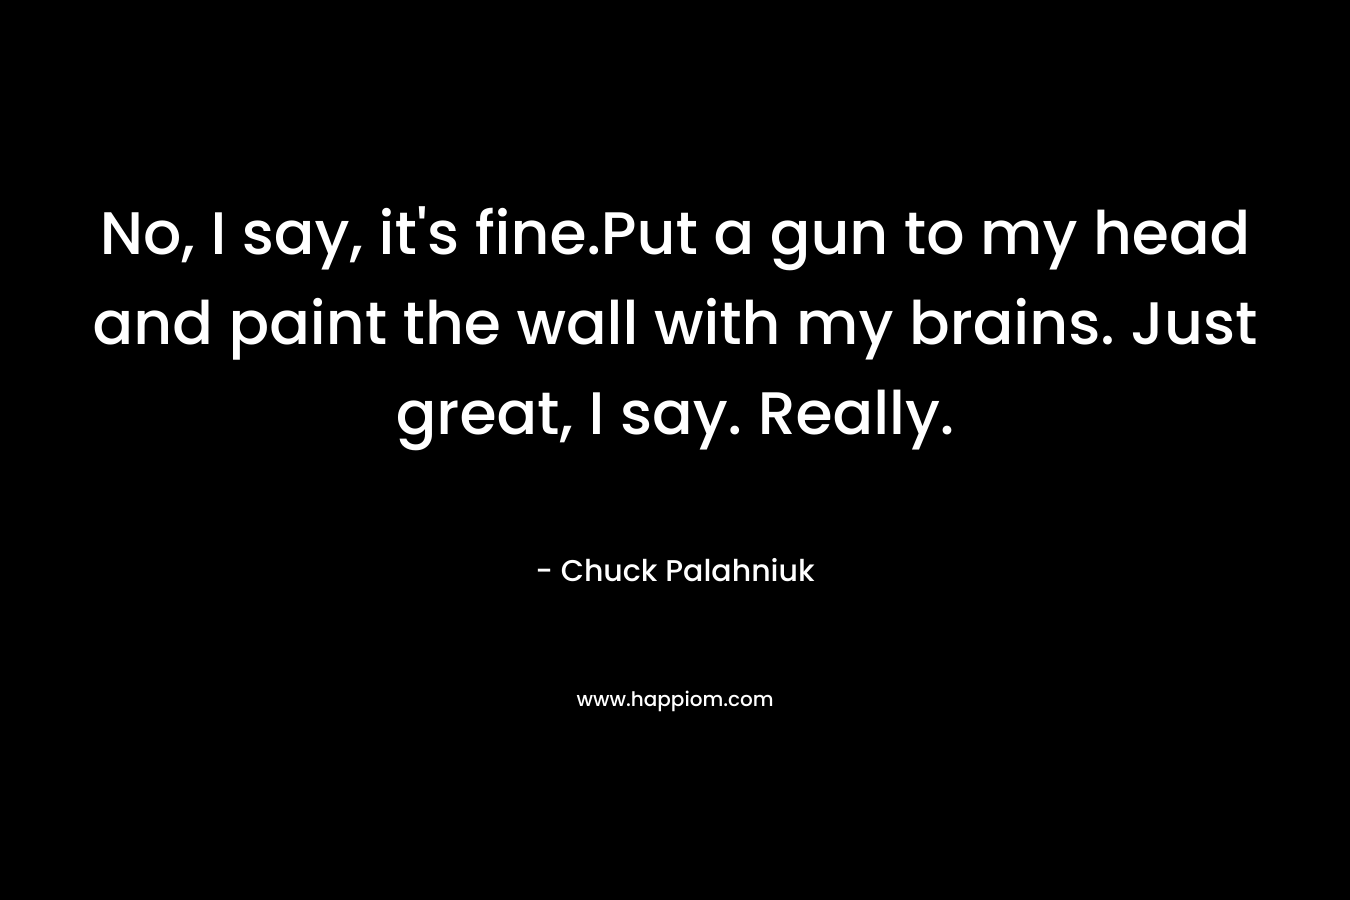 No, I say, it’s fine.Put a gun to my head and paint the wall with my brains. Just great, I say. Really. – Chuck Palahniuk